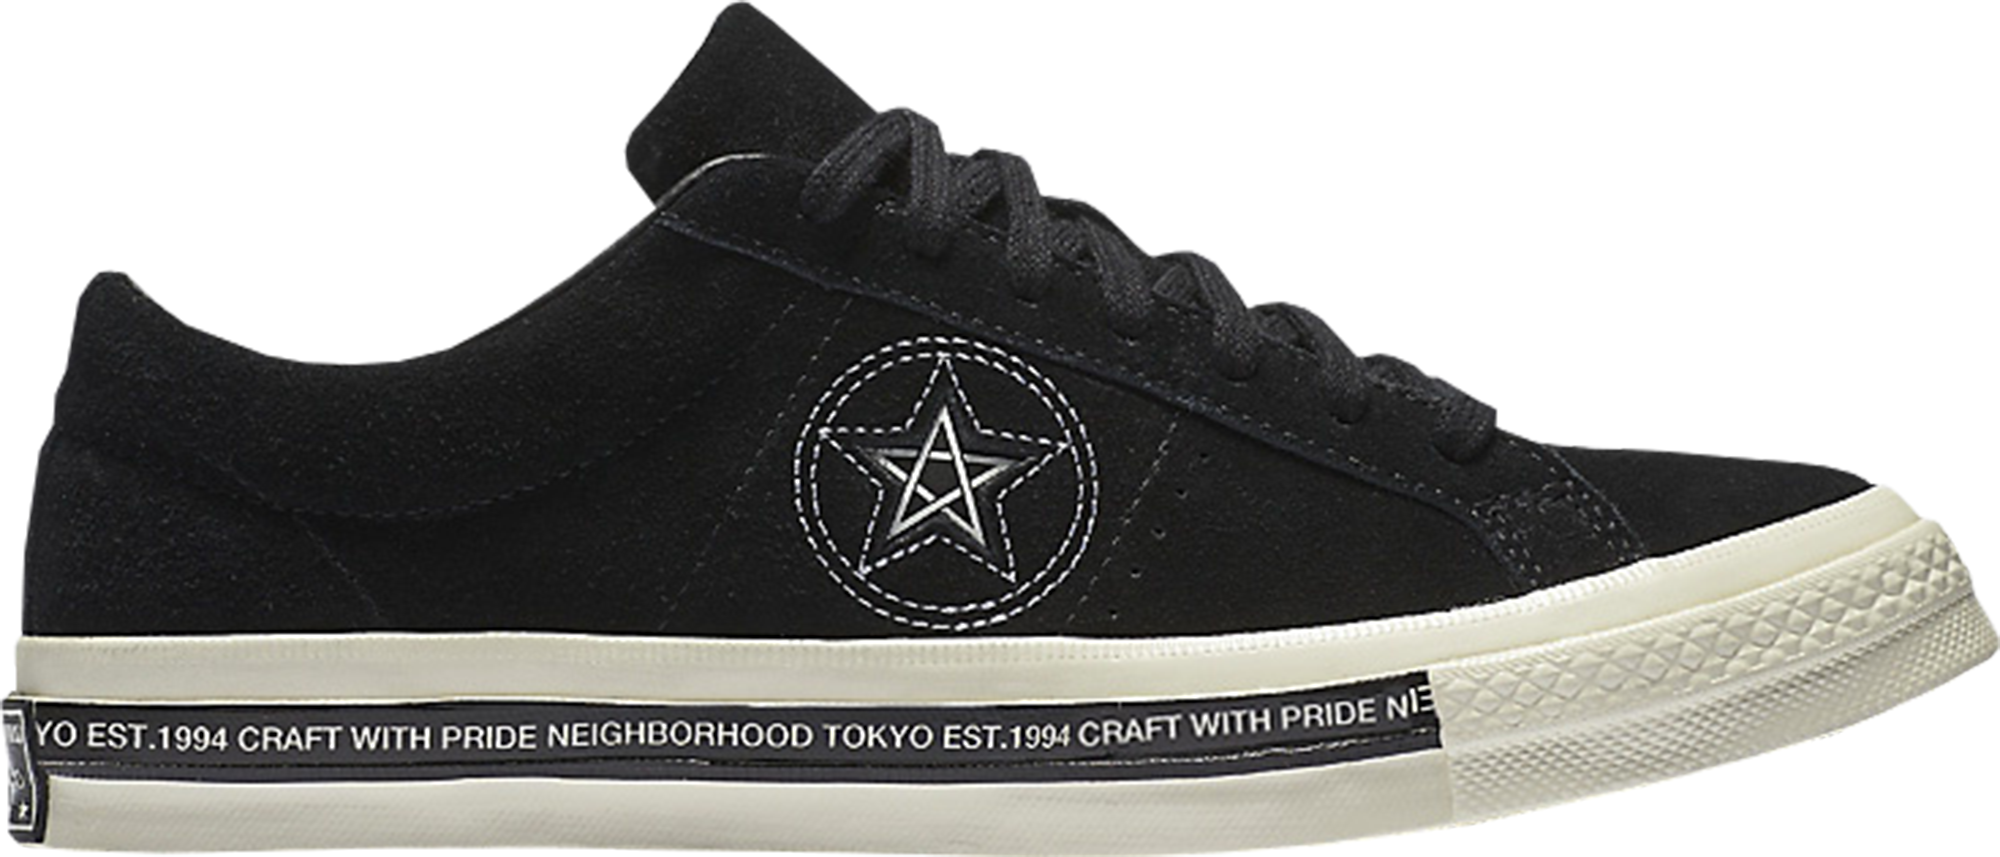 converse one star 74 mid